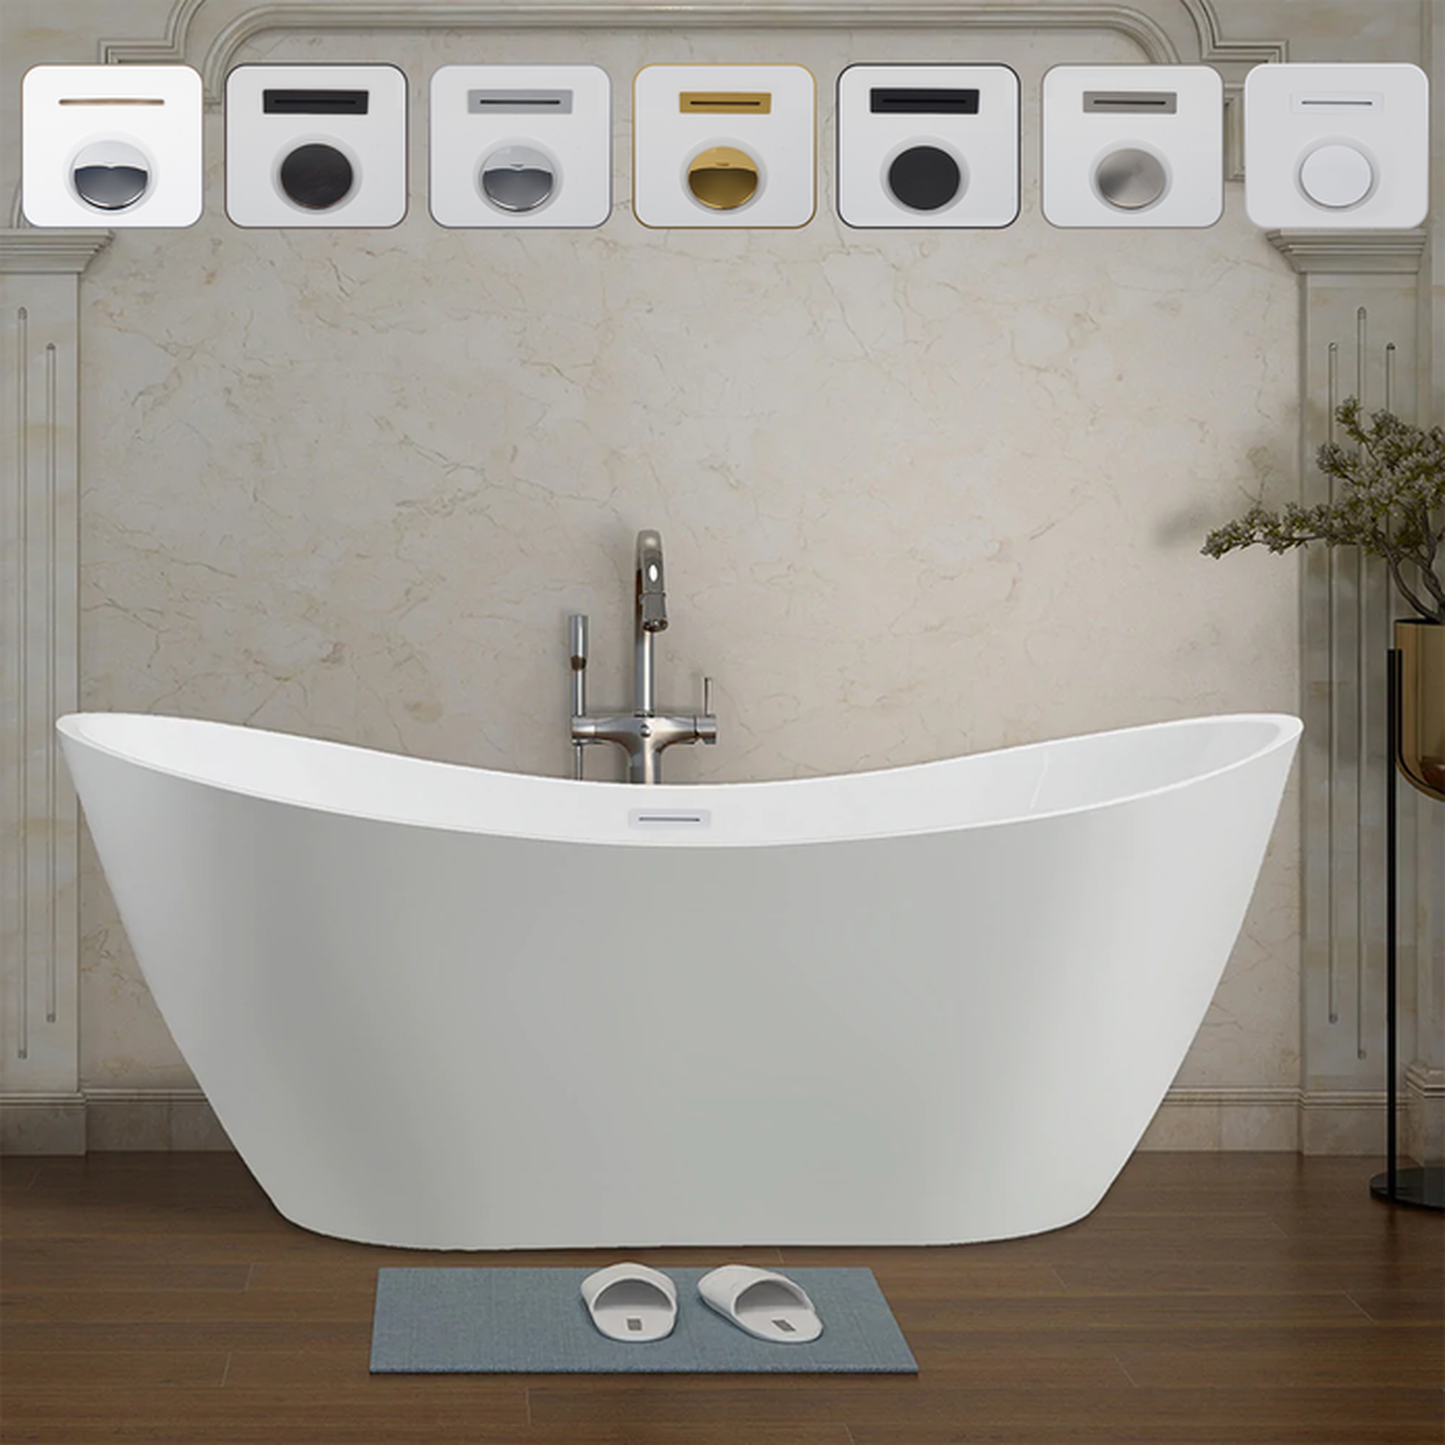 Vanity Art 71" W x 28" H White Acrylic Freestanding Bathtub With Pure White Pop-up Drain, Slotted Overflow and Flexible Drain Hose